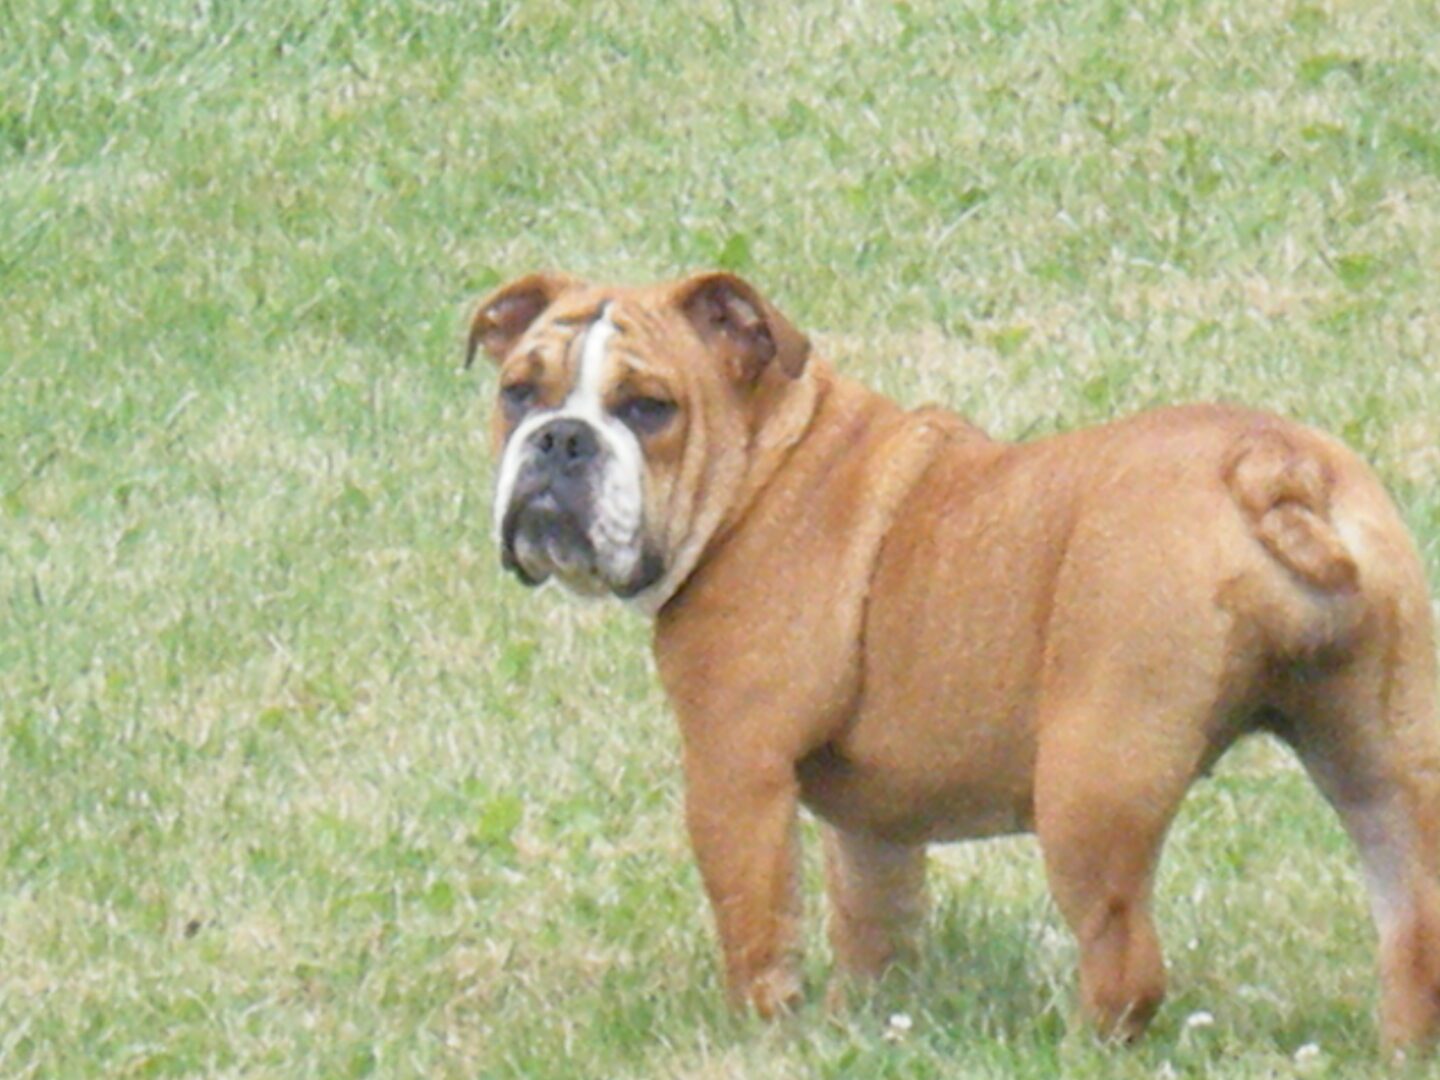 Gege Coco Puff All Brown Bull Dog Looking at A Camera